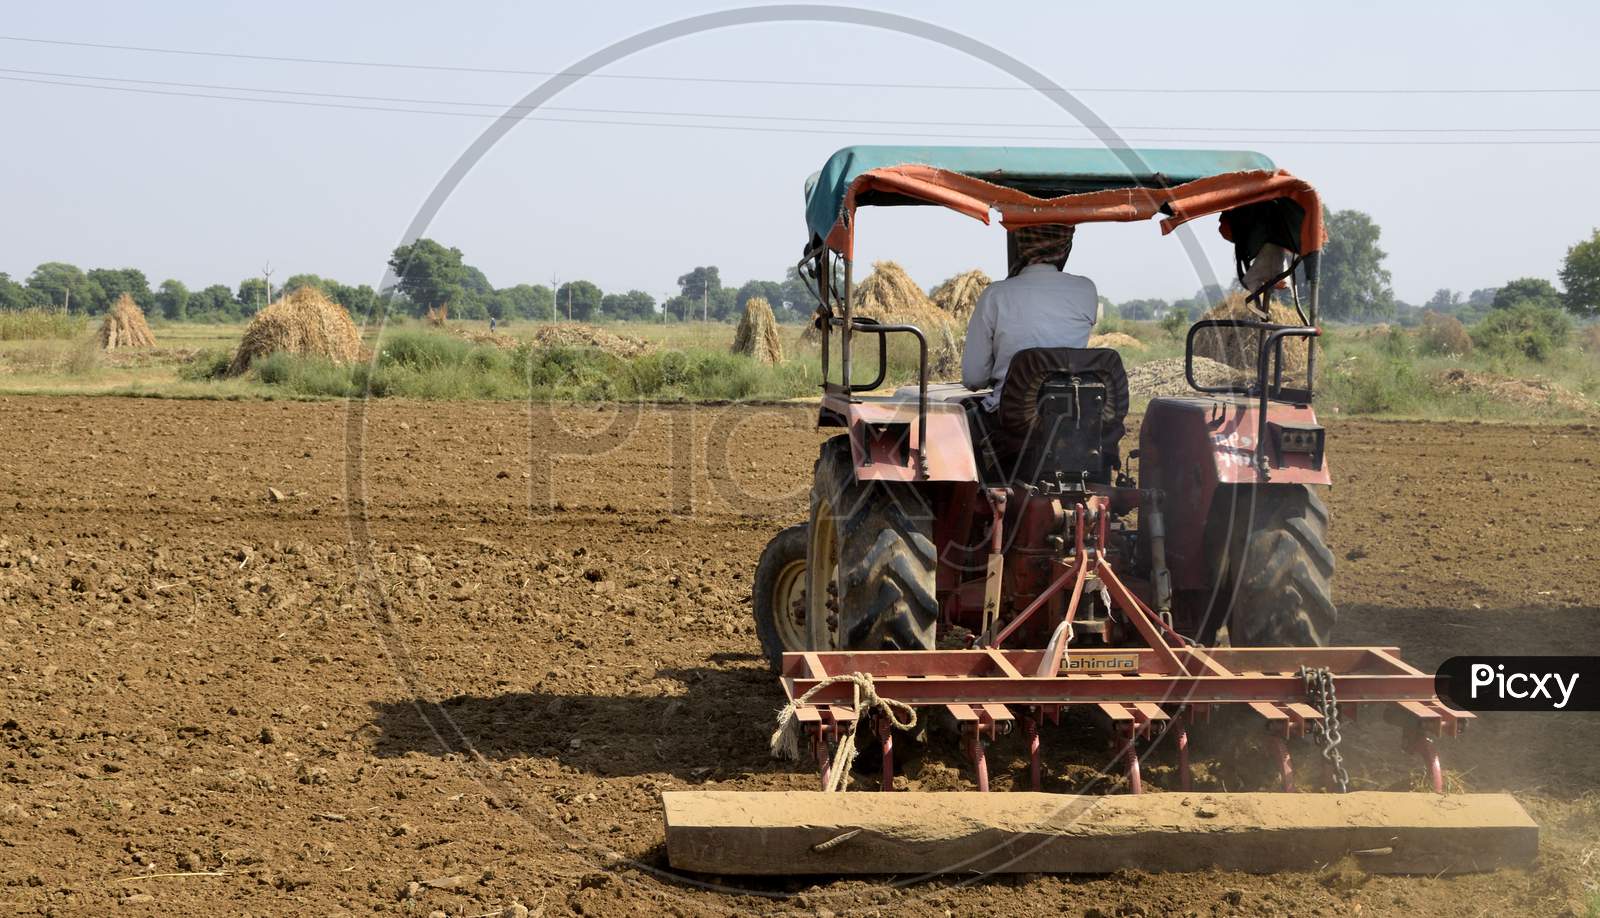 Gwalior, India, October 2018 : An Indian Farmer Is Cultivating A Field With His Tractor, Making It Ready To Sow The Seeds